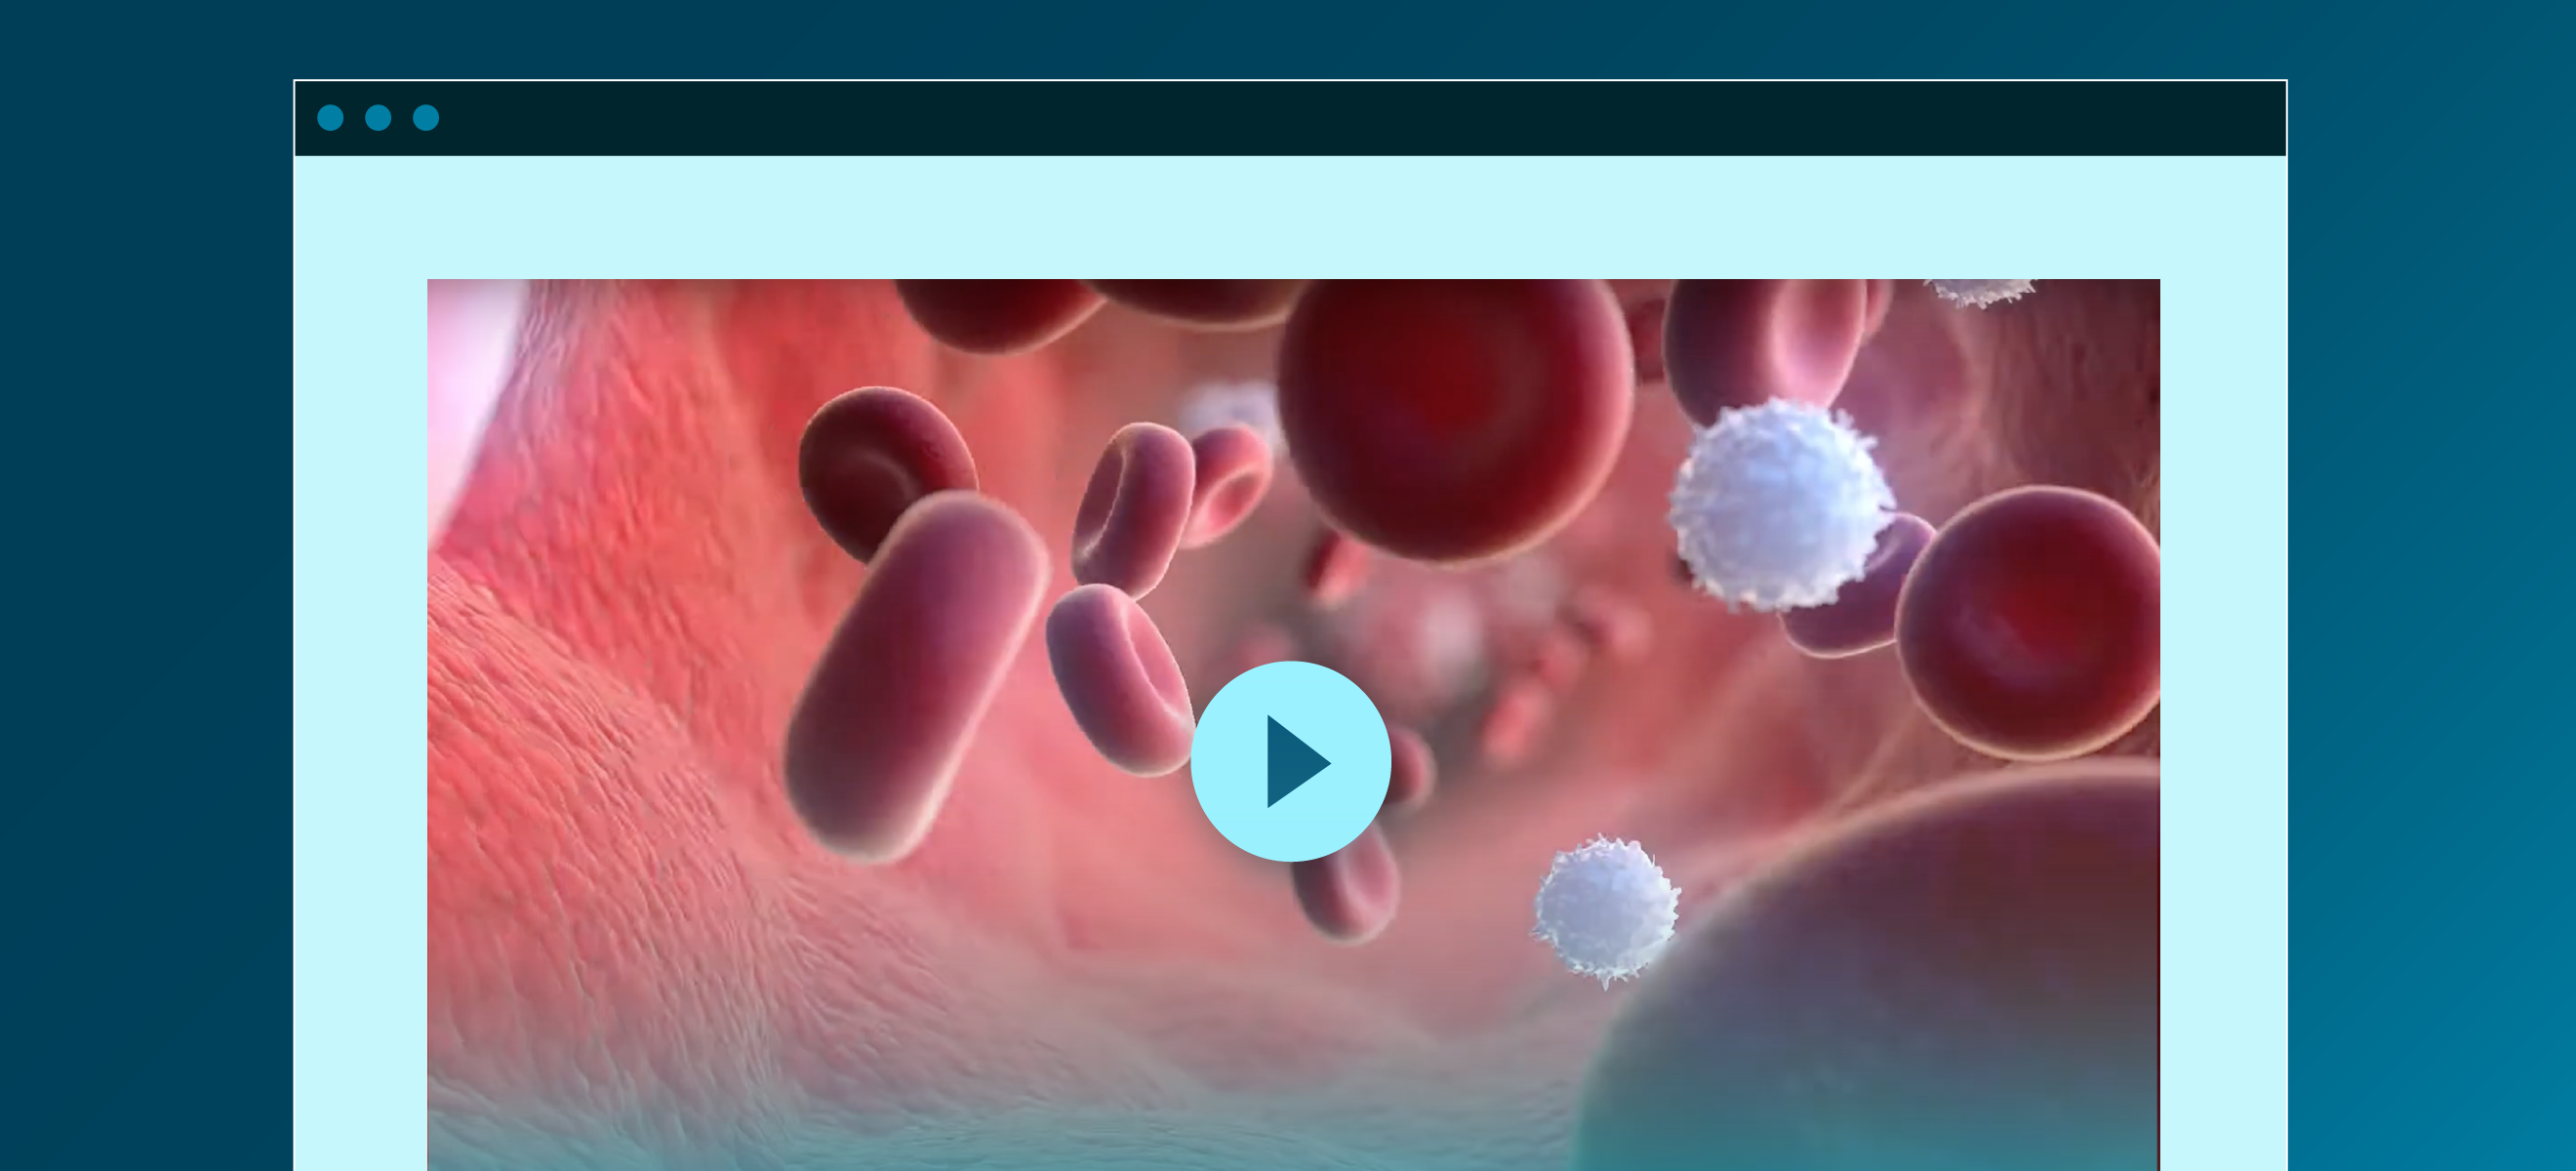 Demo-MedicalAnimations-FeaturedImage%402x.png